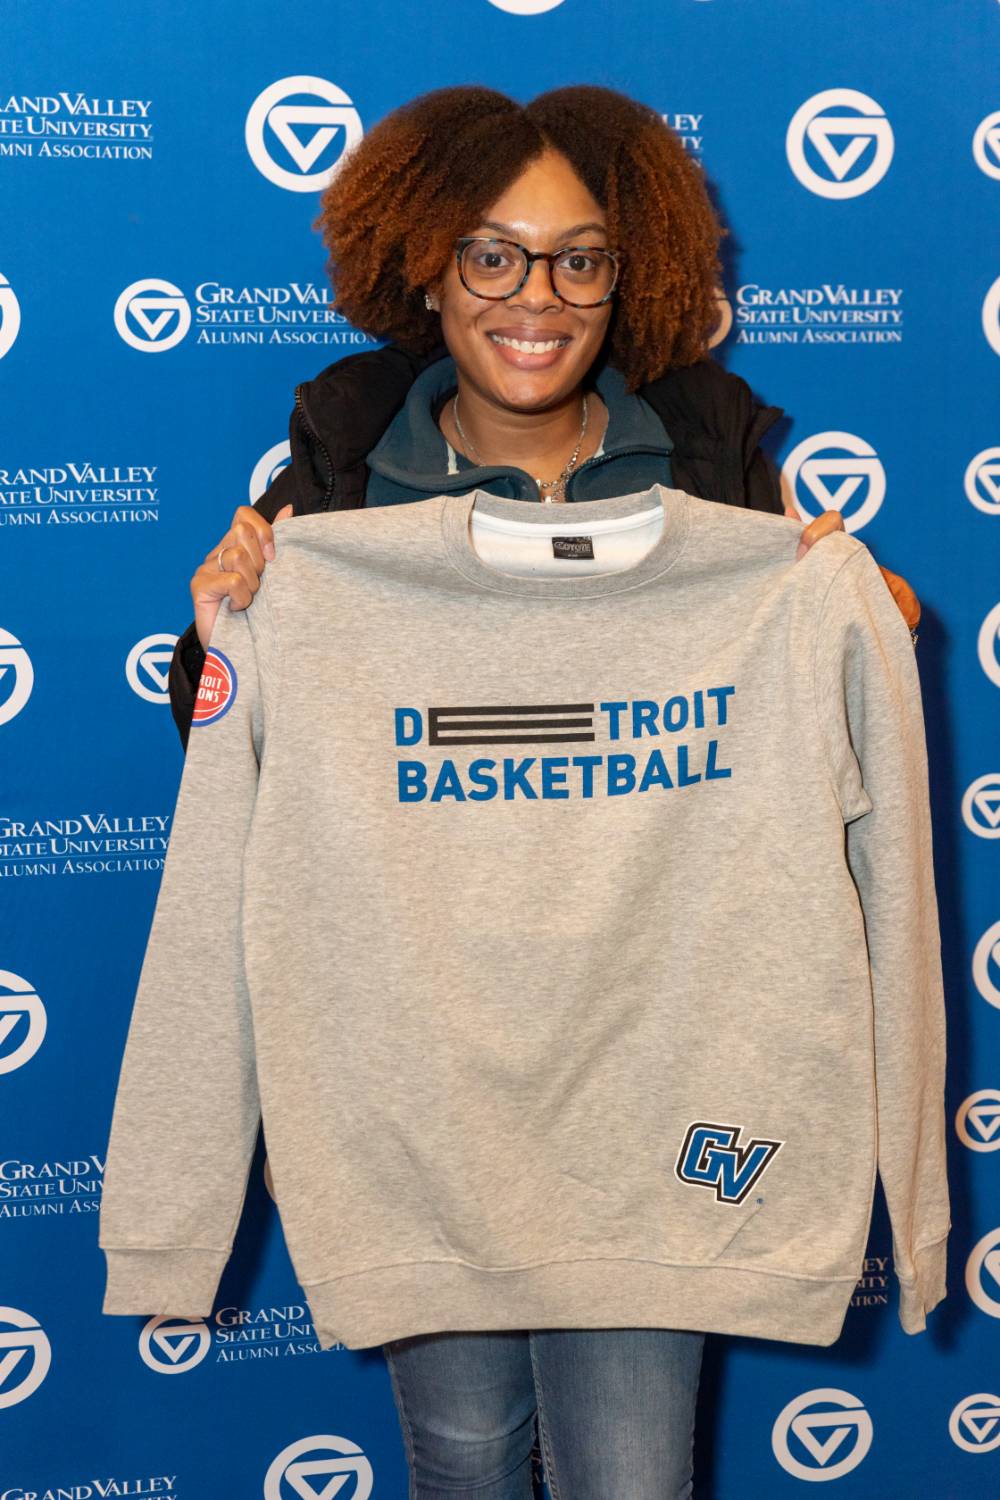 An alum and her shirt in front of the GVSU Alumni Relations backdrop.